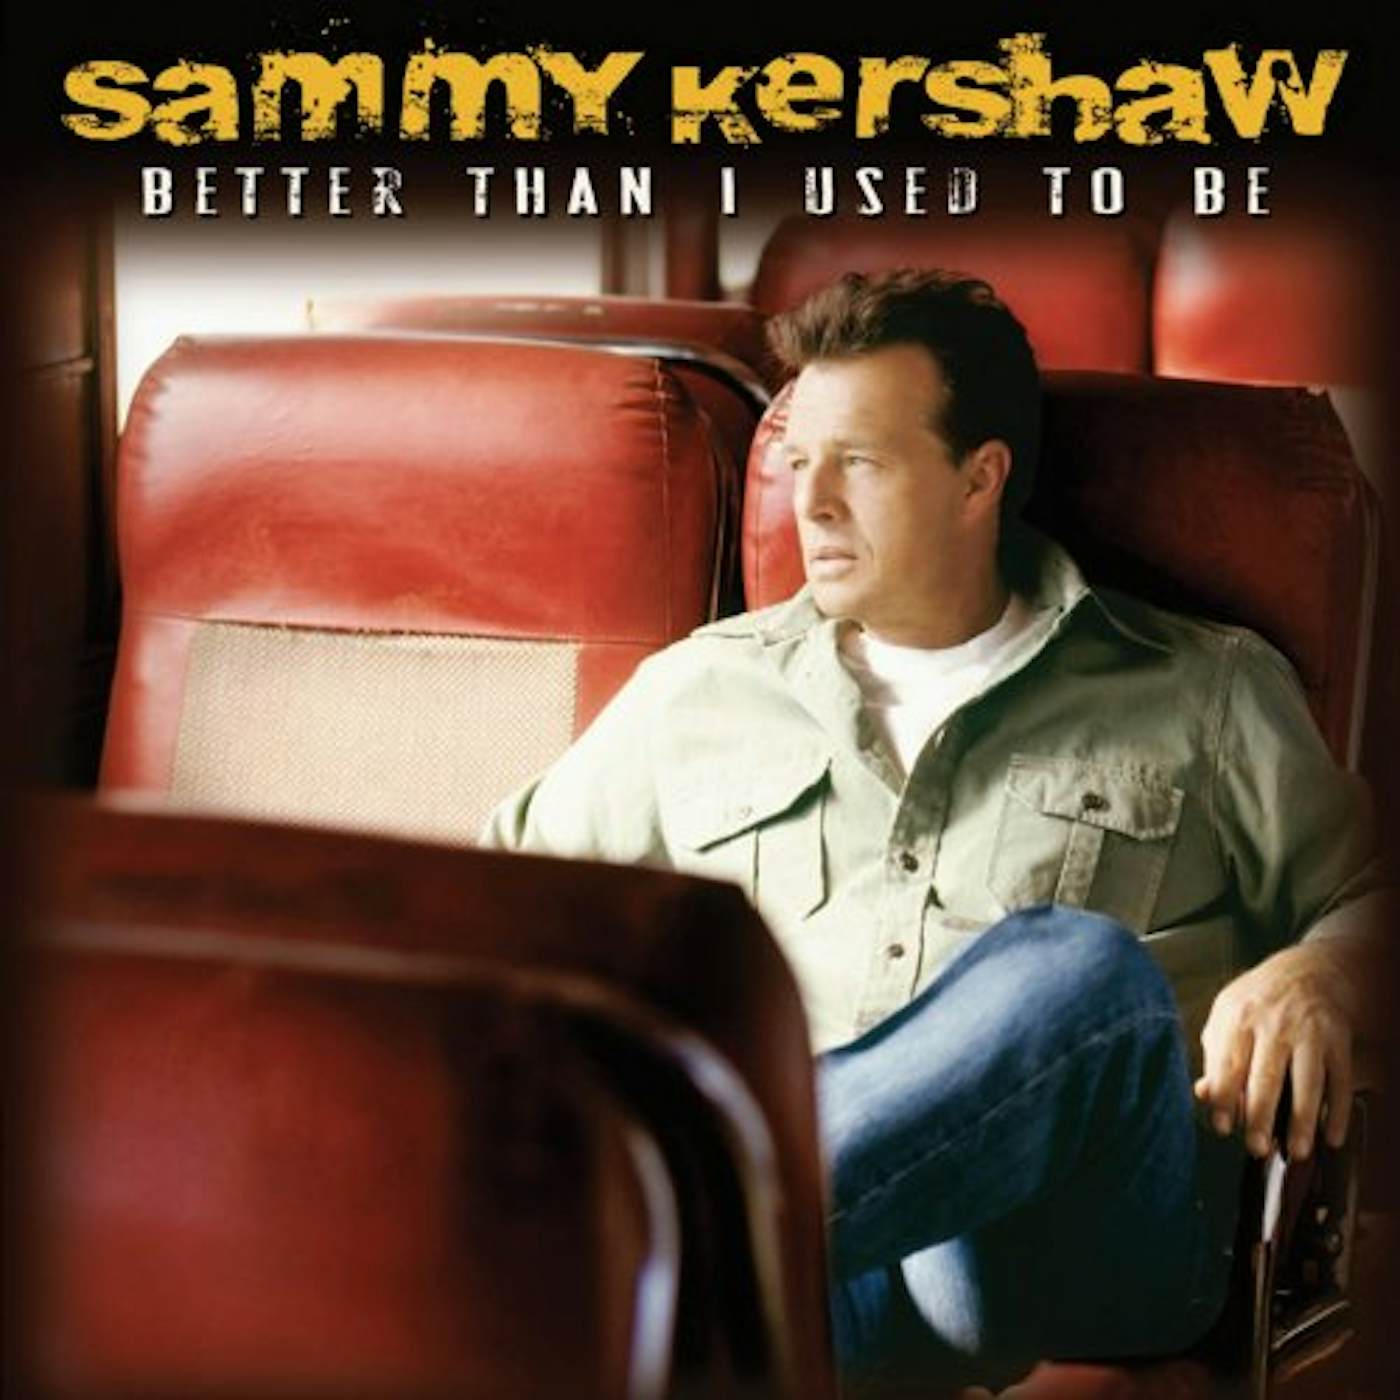 Sammy Kershaw BETTER THAN I USED TO BE CD